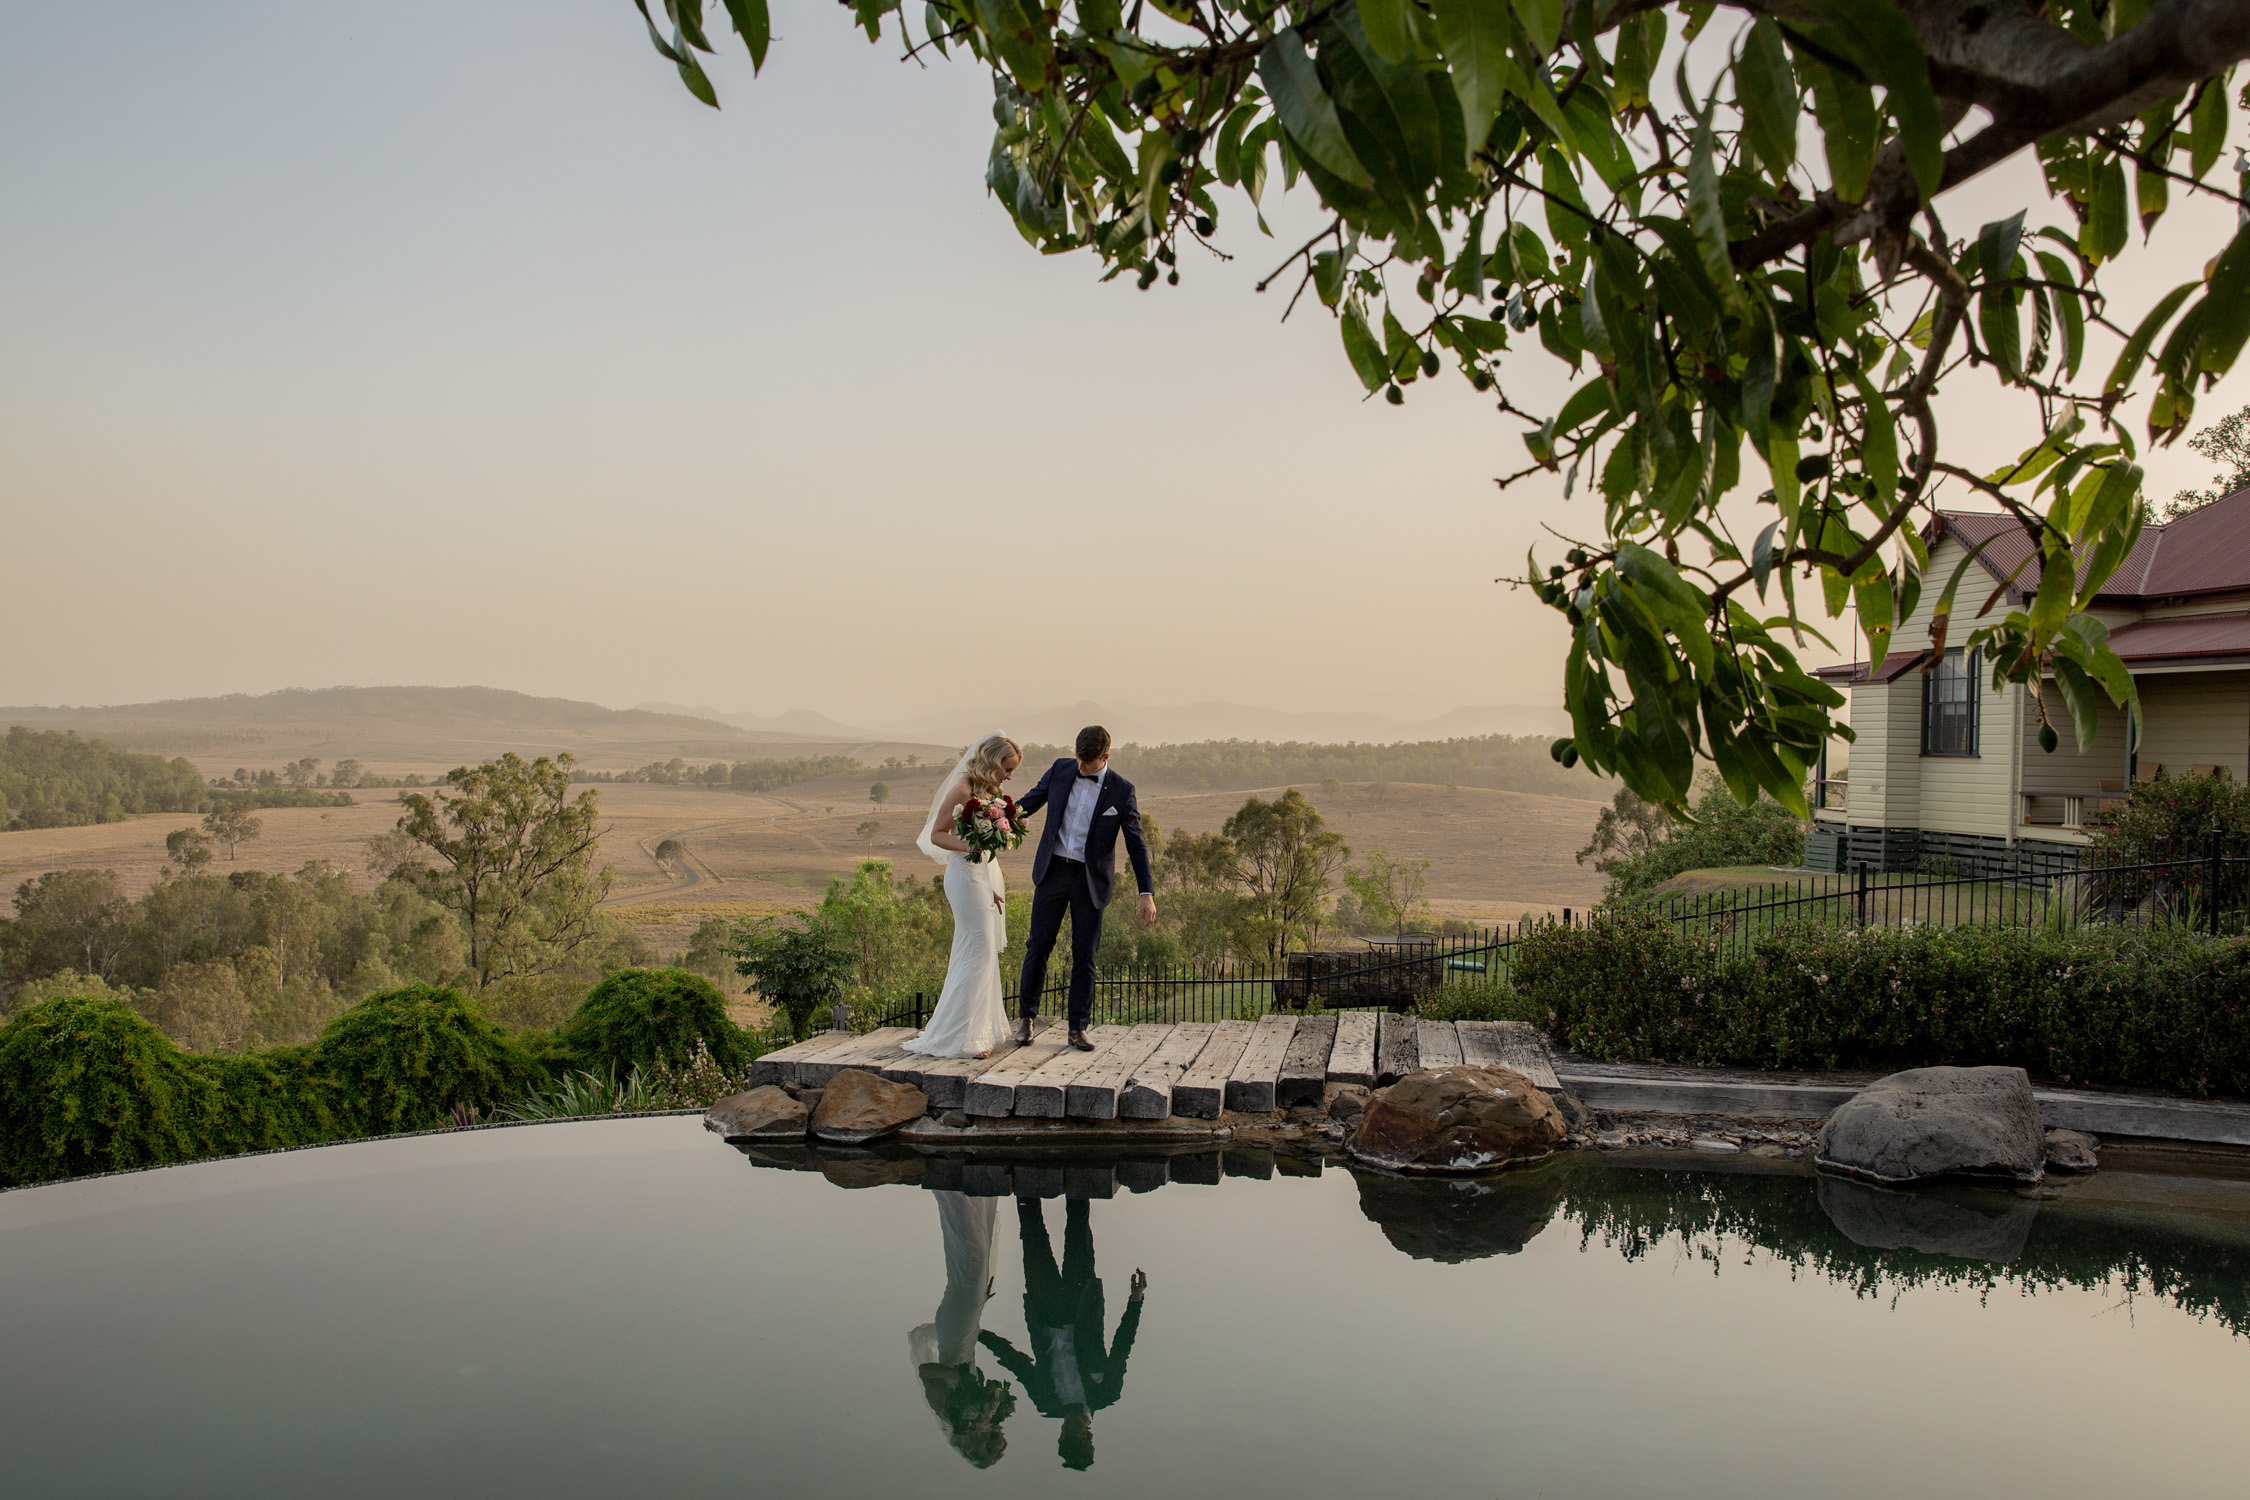 sunset-natural, fun, romantic-wedding-photography at Spicers-hiddenvale-QuinceandMulberryStudios